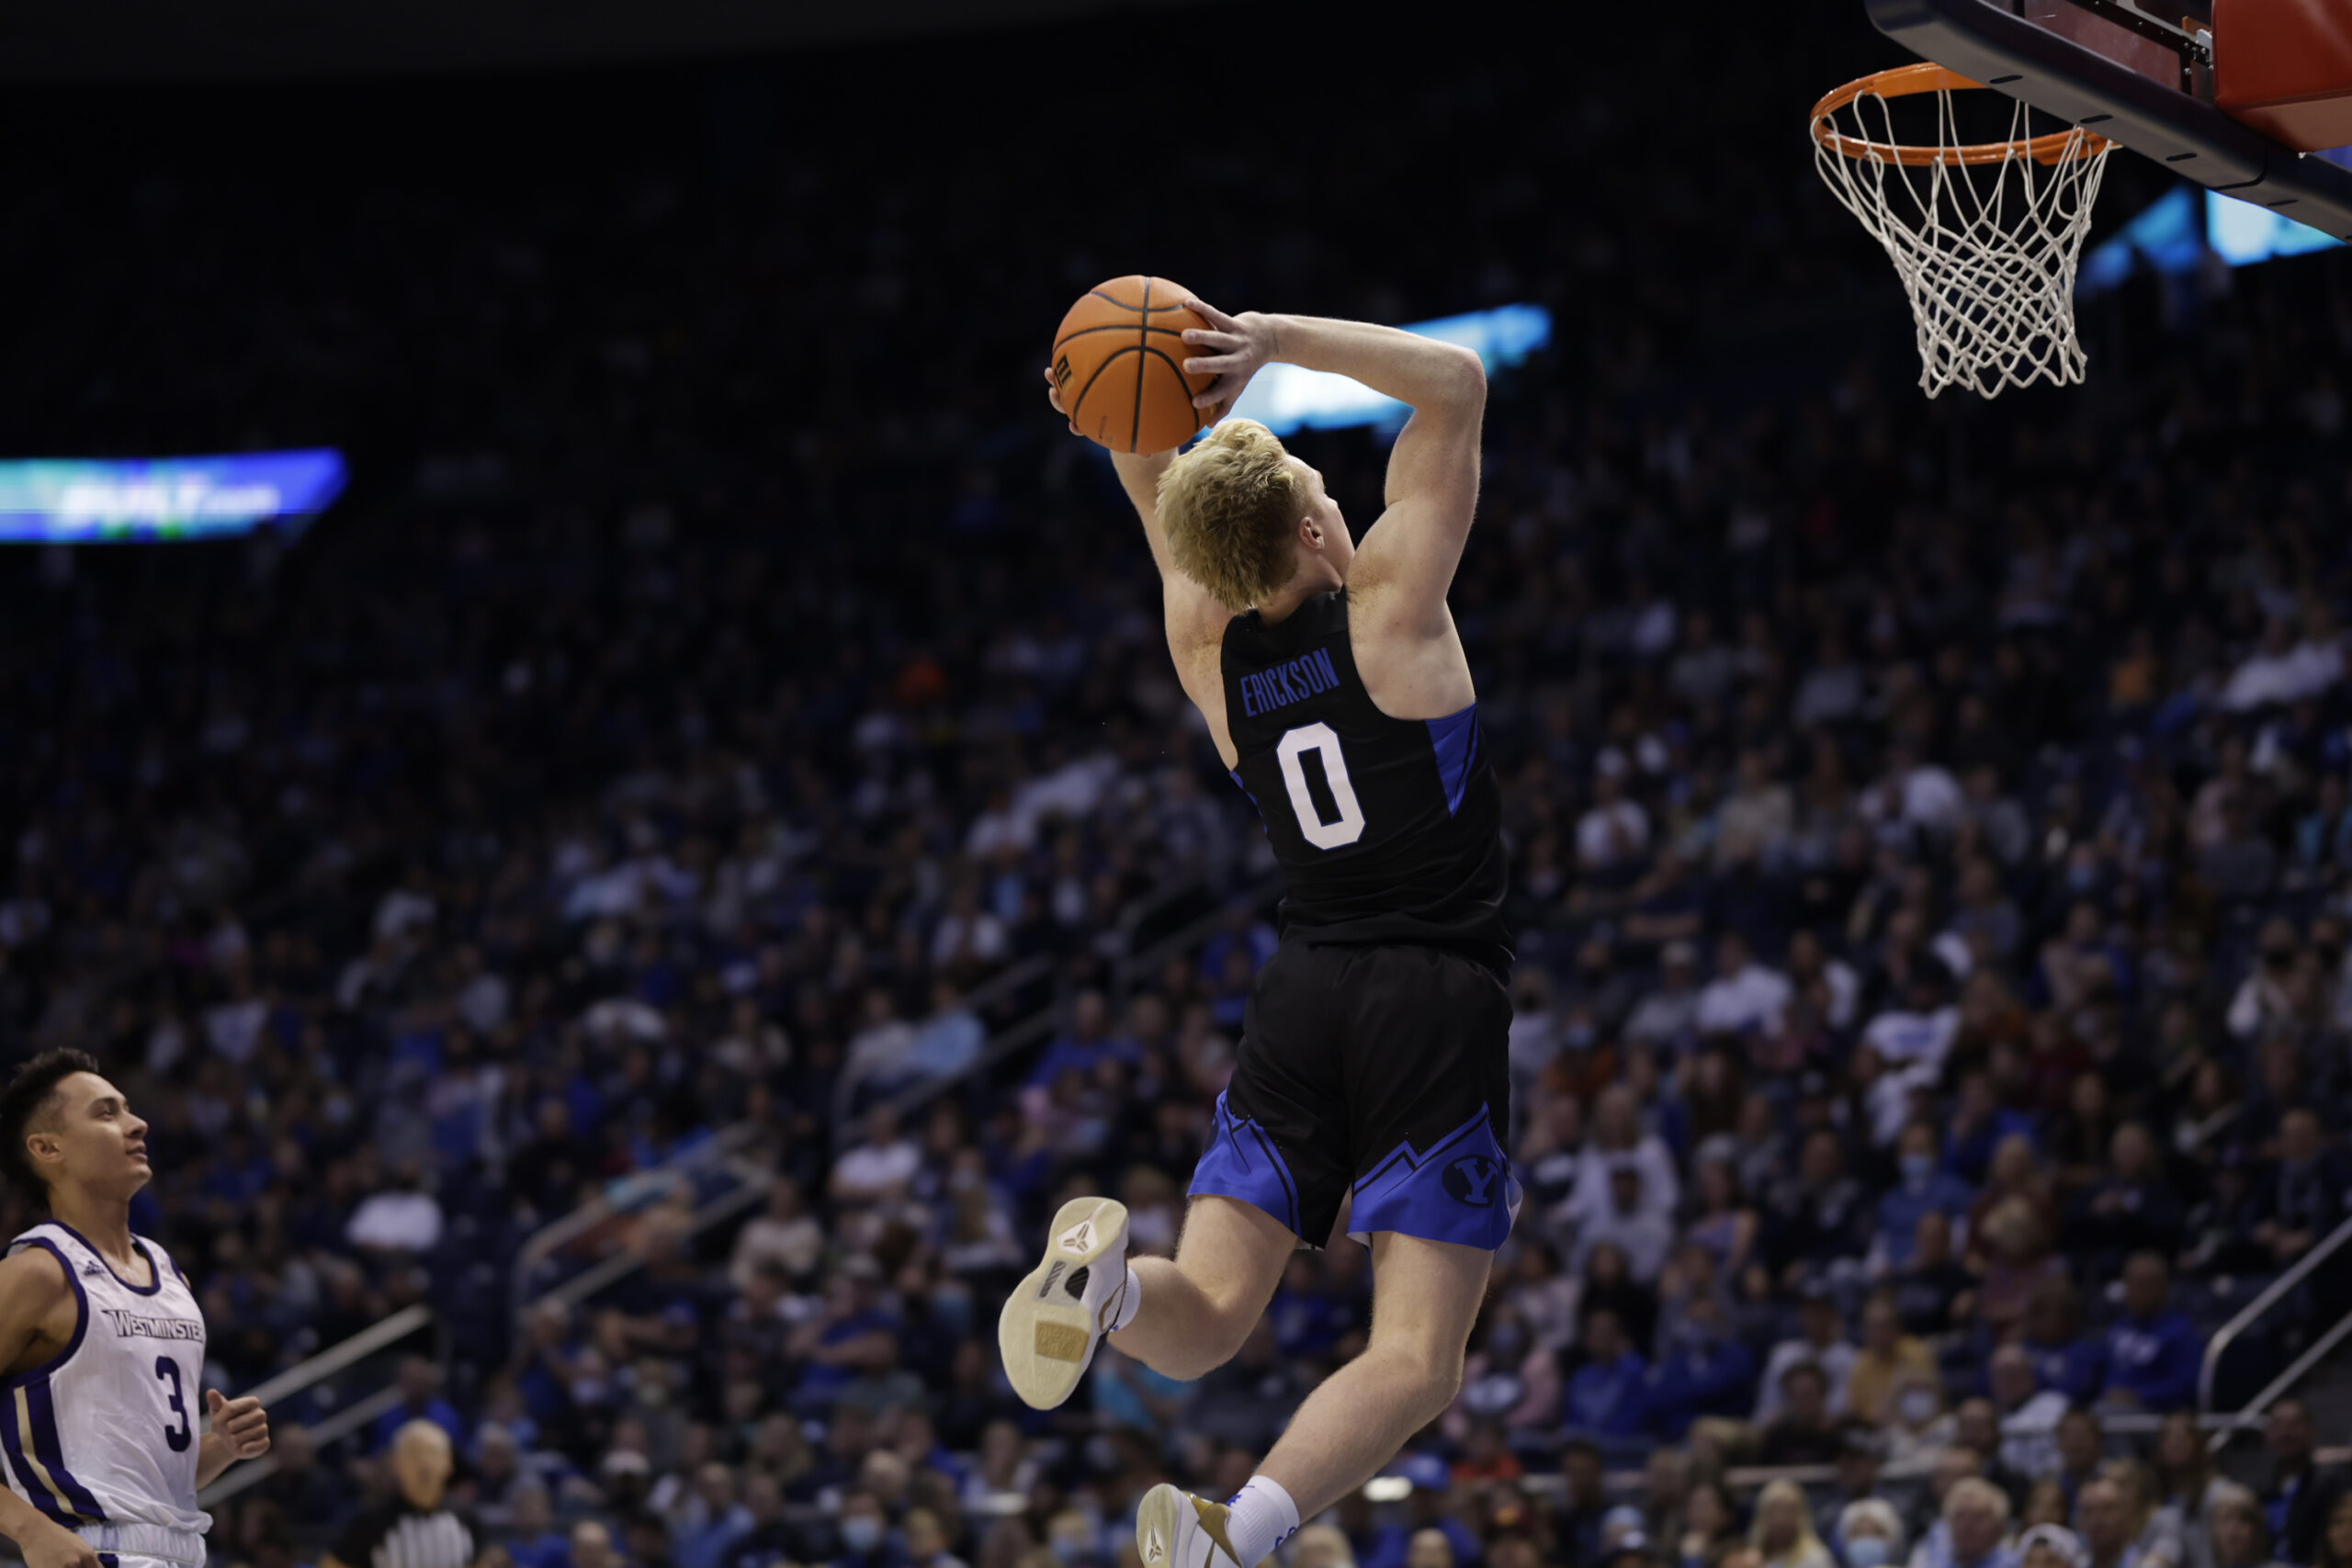 BYU men’s hoops pulls away late for 65-53 win over Westminster